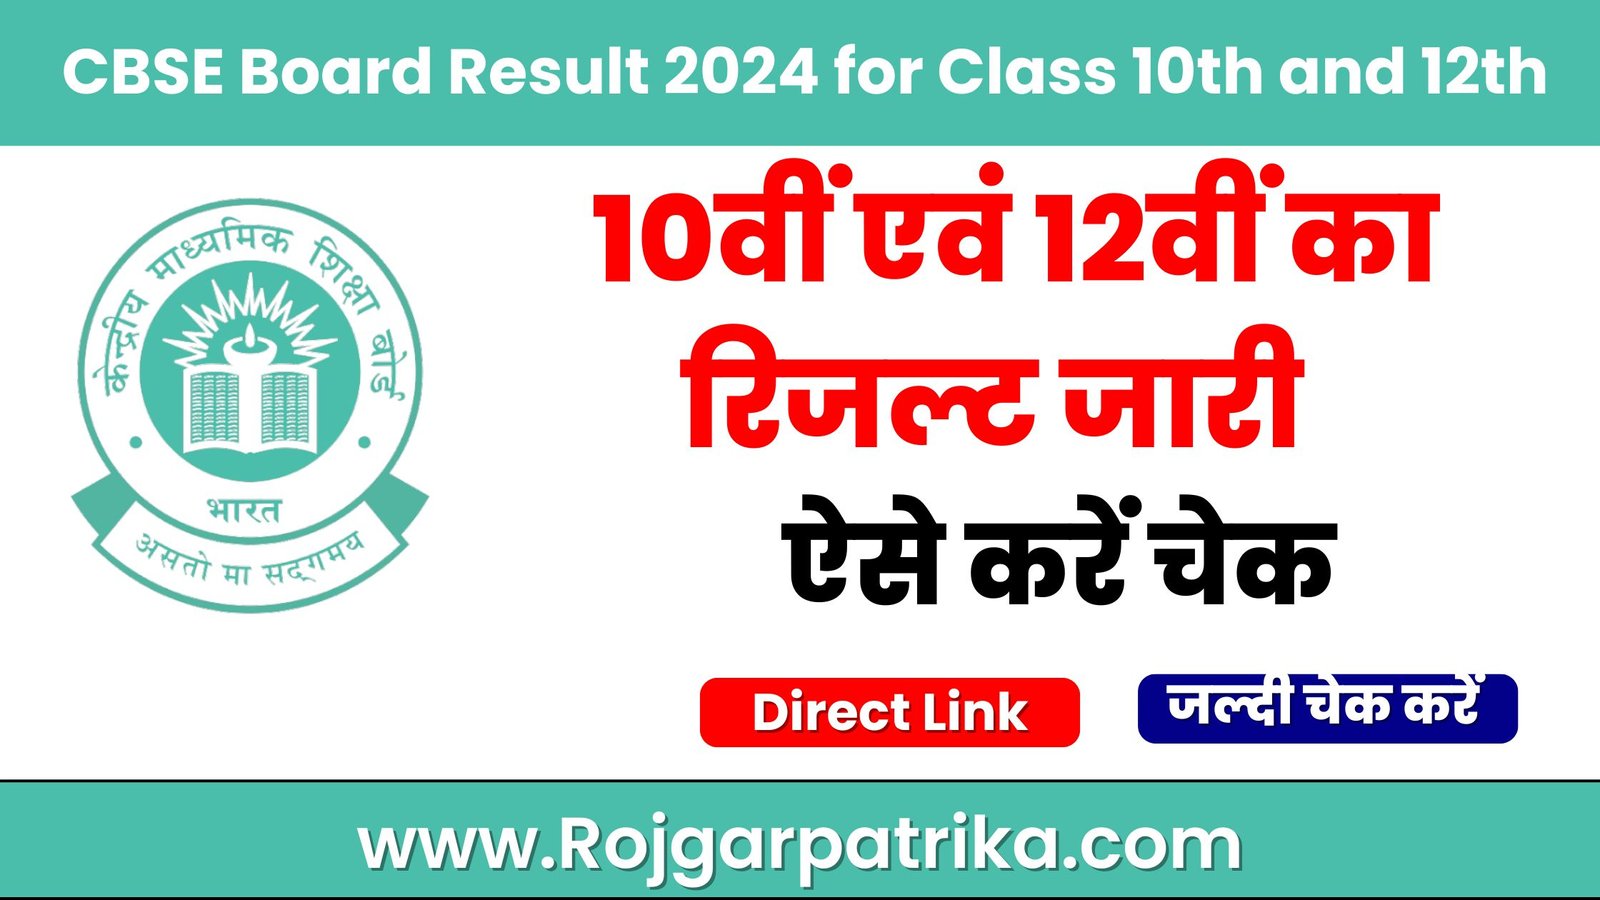 Cbse Board Result 2024 For Class 10 And 12